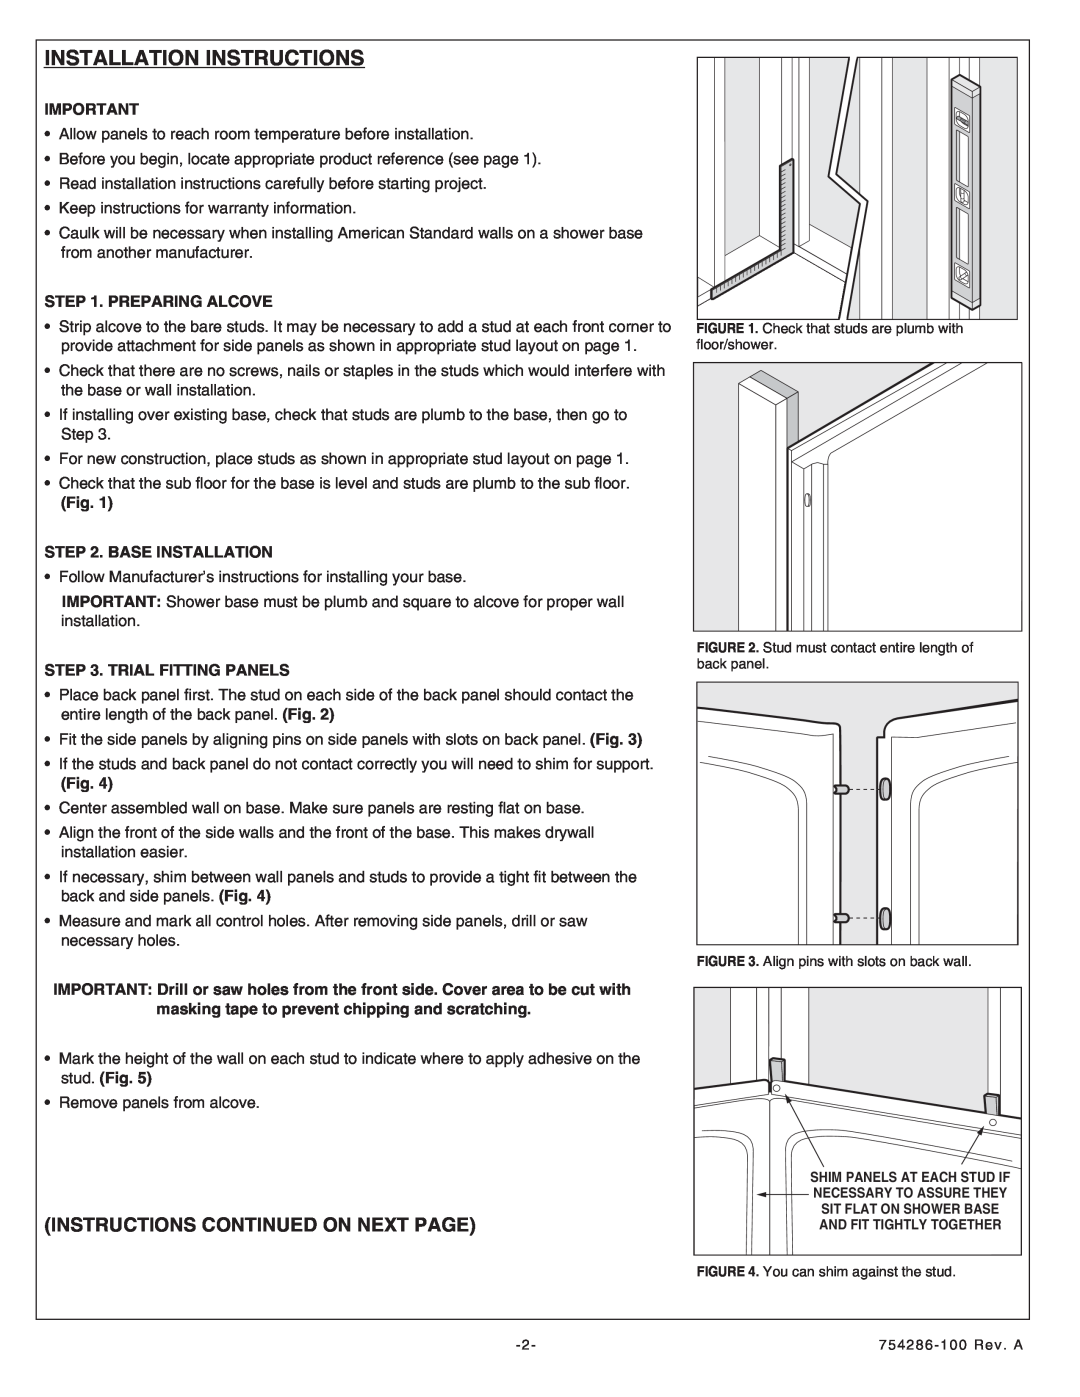 American Standard 4834Y1.SW.XXX Installation Instructions, Instructions Continued On Next Page, Preparing Alcove 